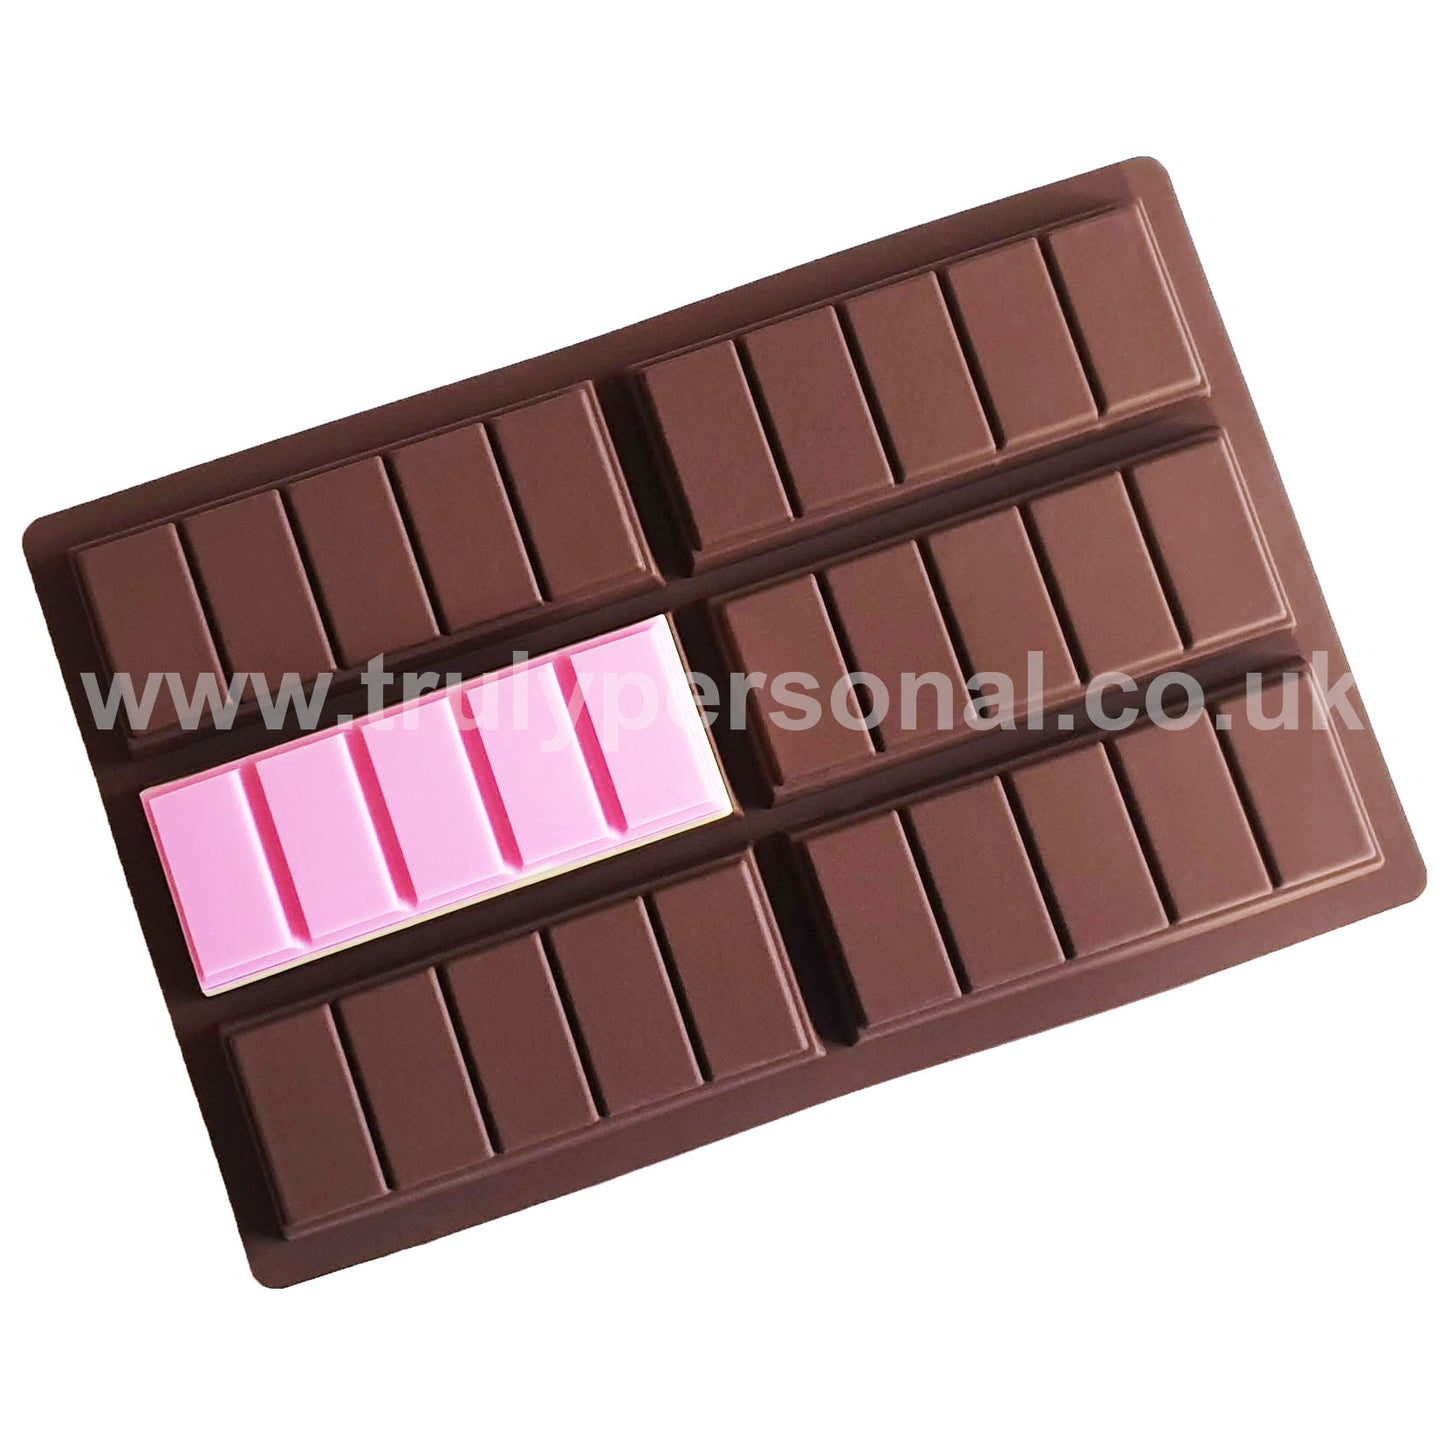 Snap Bar Silicone Mould - 6 x 5 | Wax Melts | Truly Personal Ltd